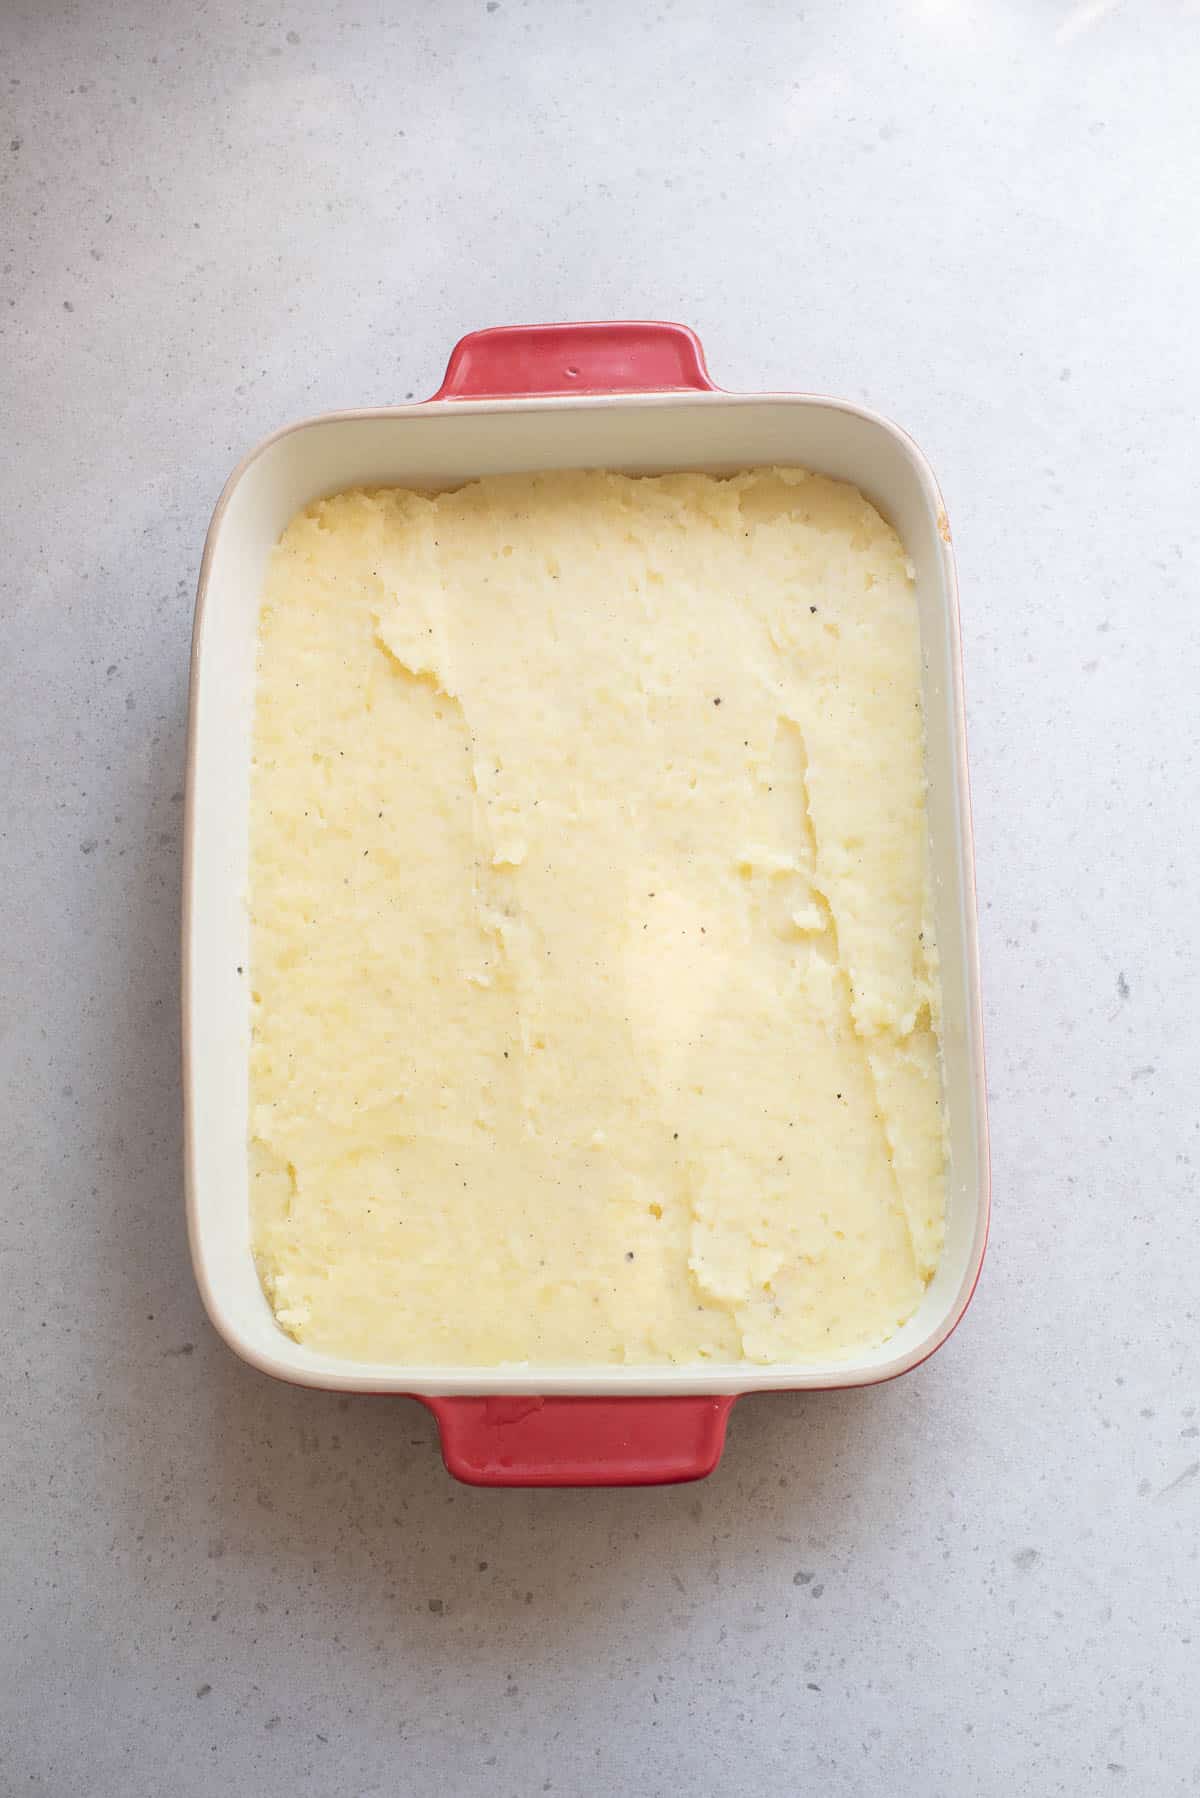 Mashed potatoes in a baking dish.